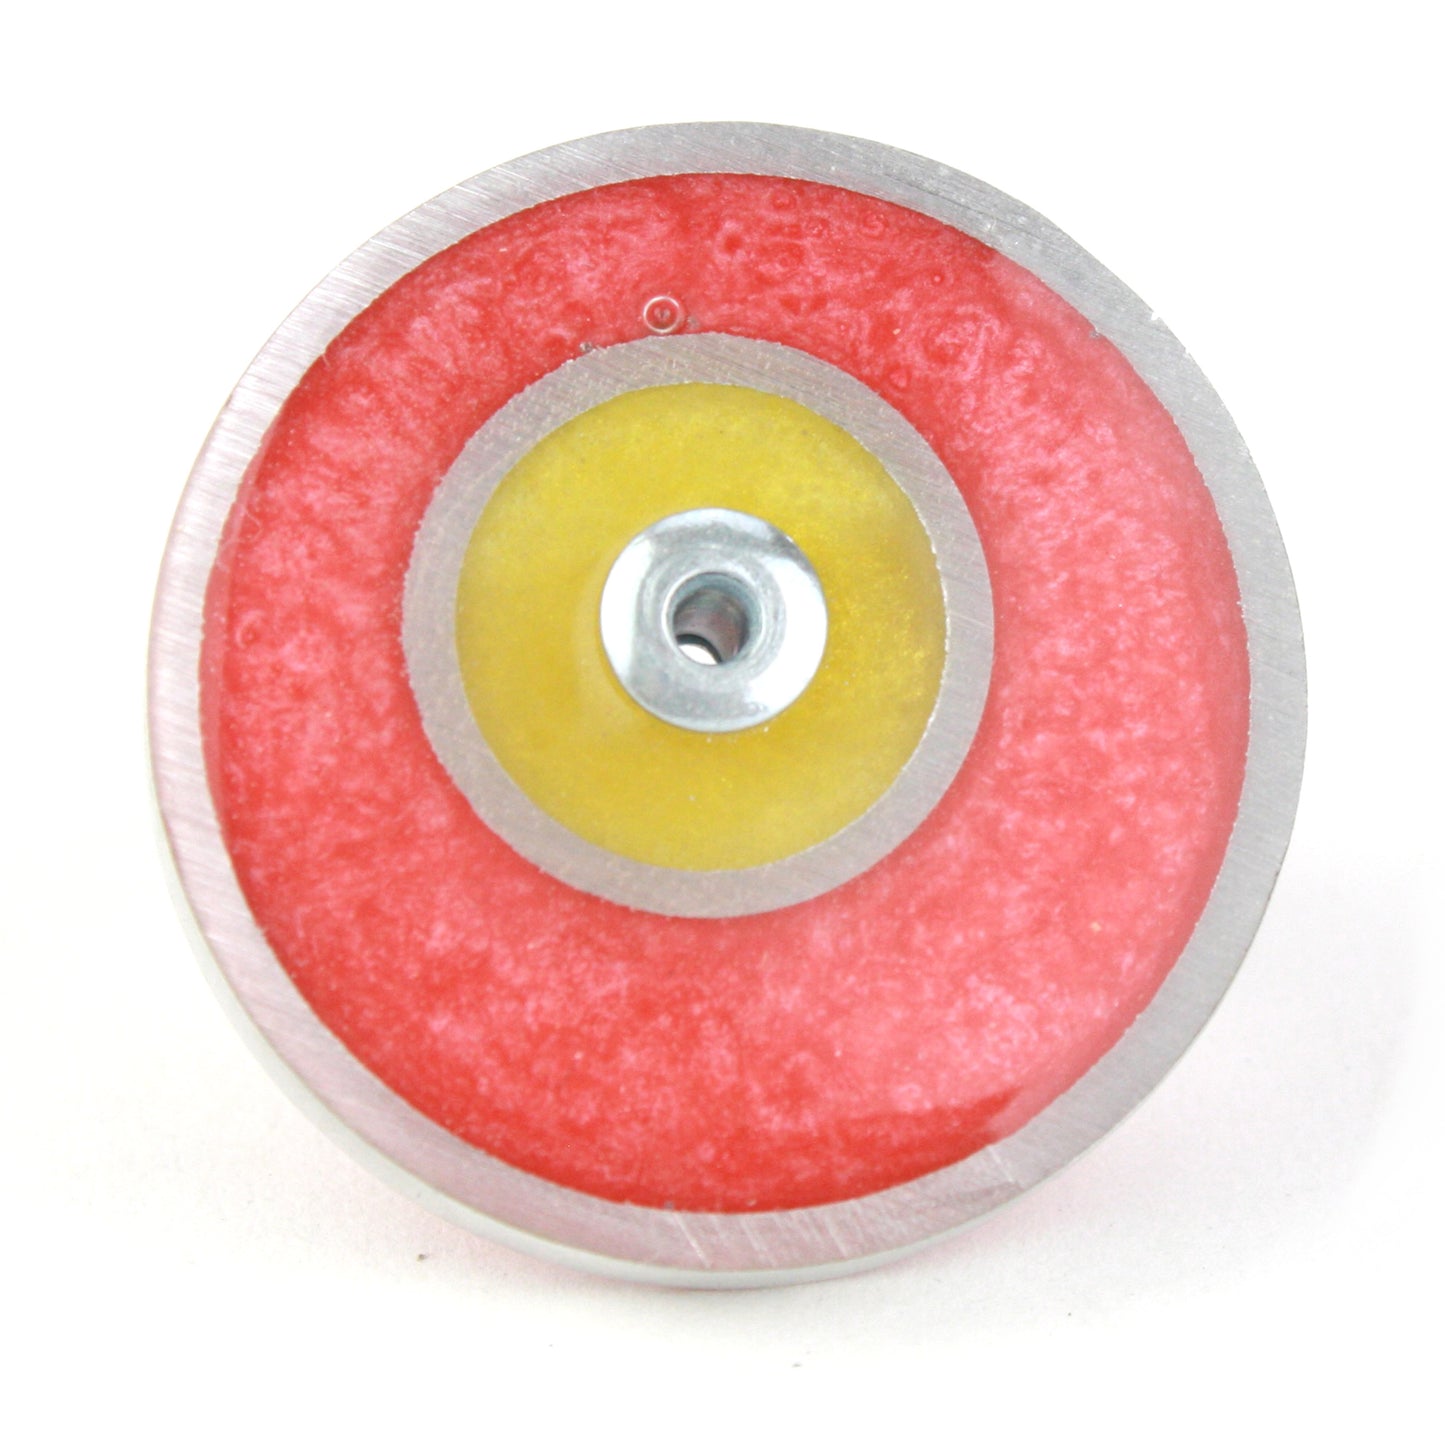 Resinique double circle ring - Light pink and yellow